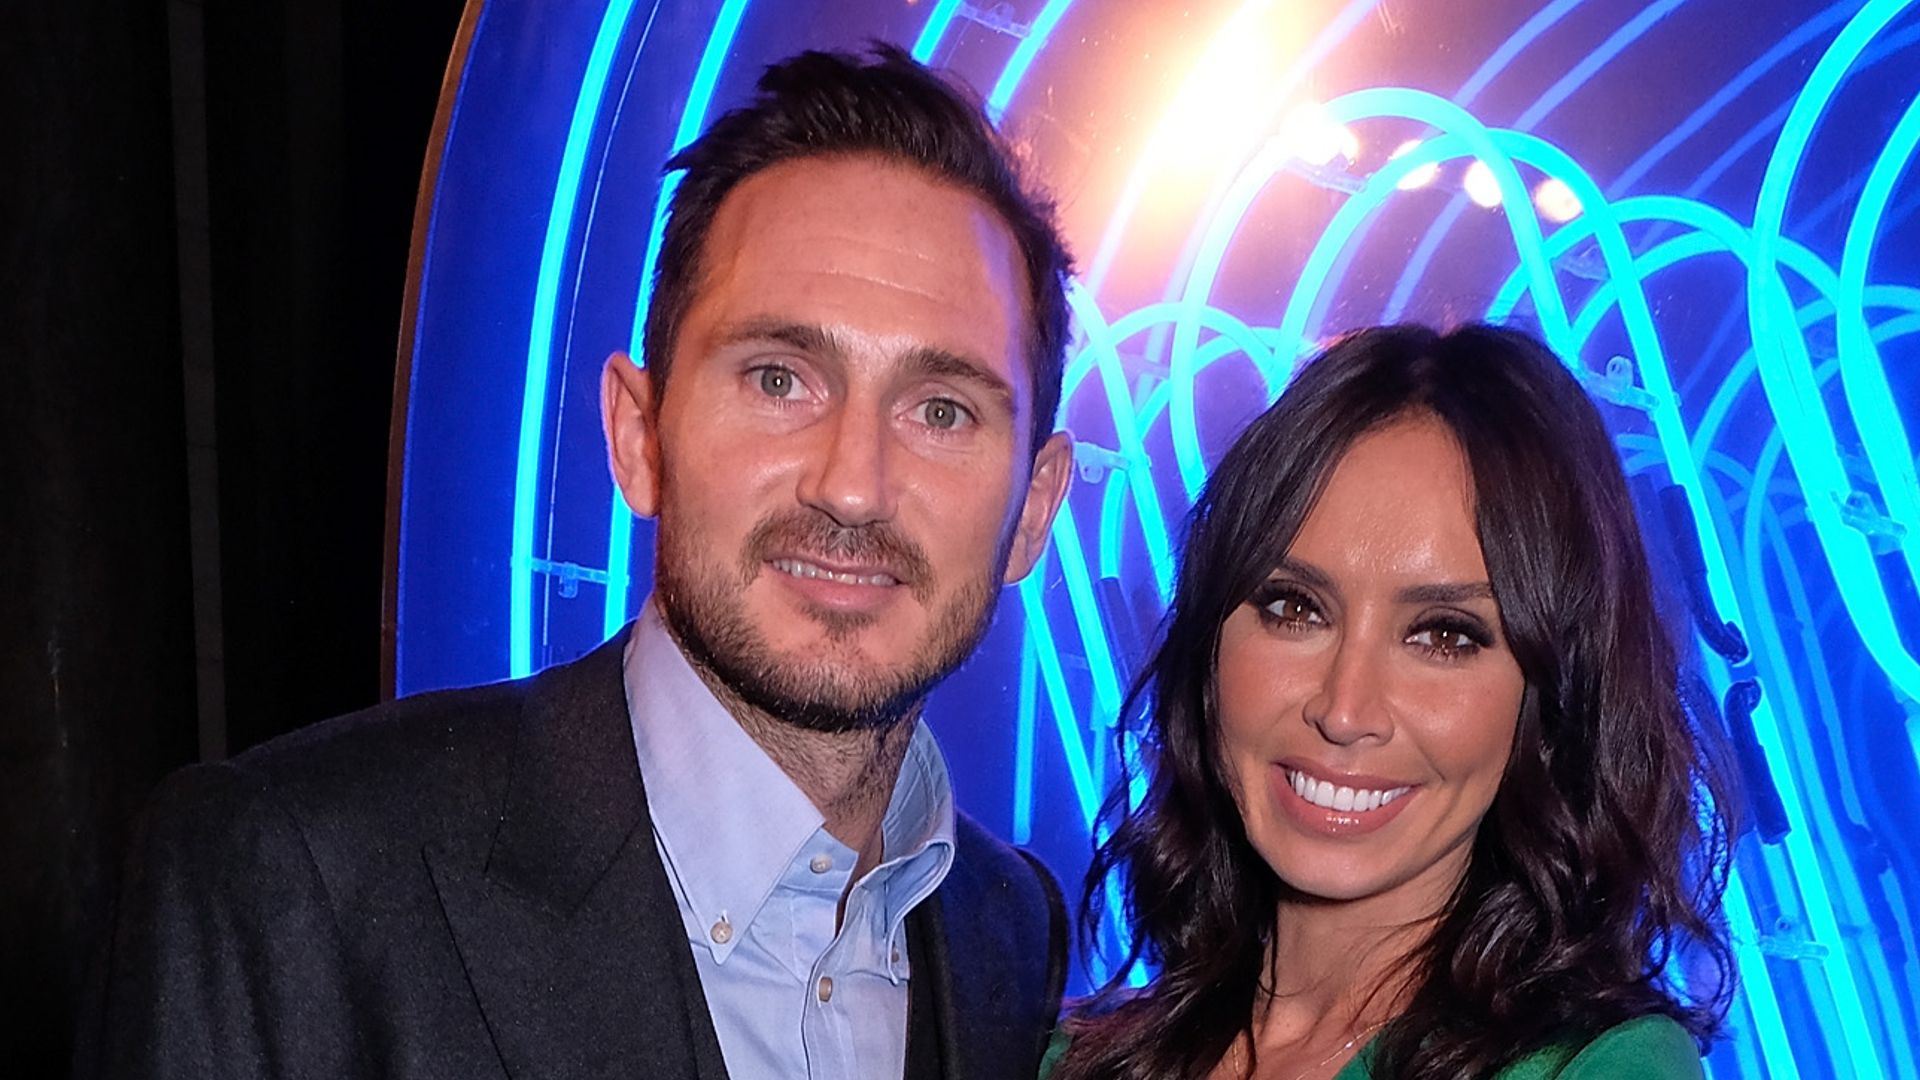 Frank Lampard and Christine Lampard standing together